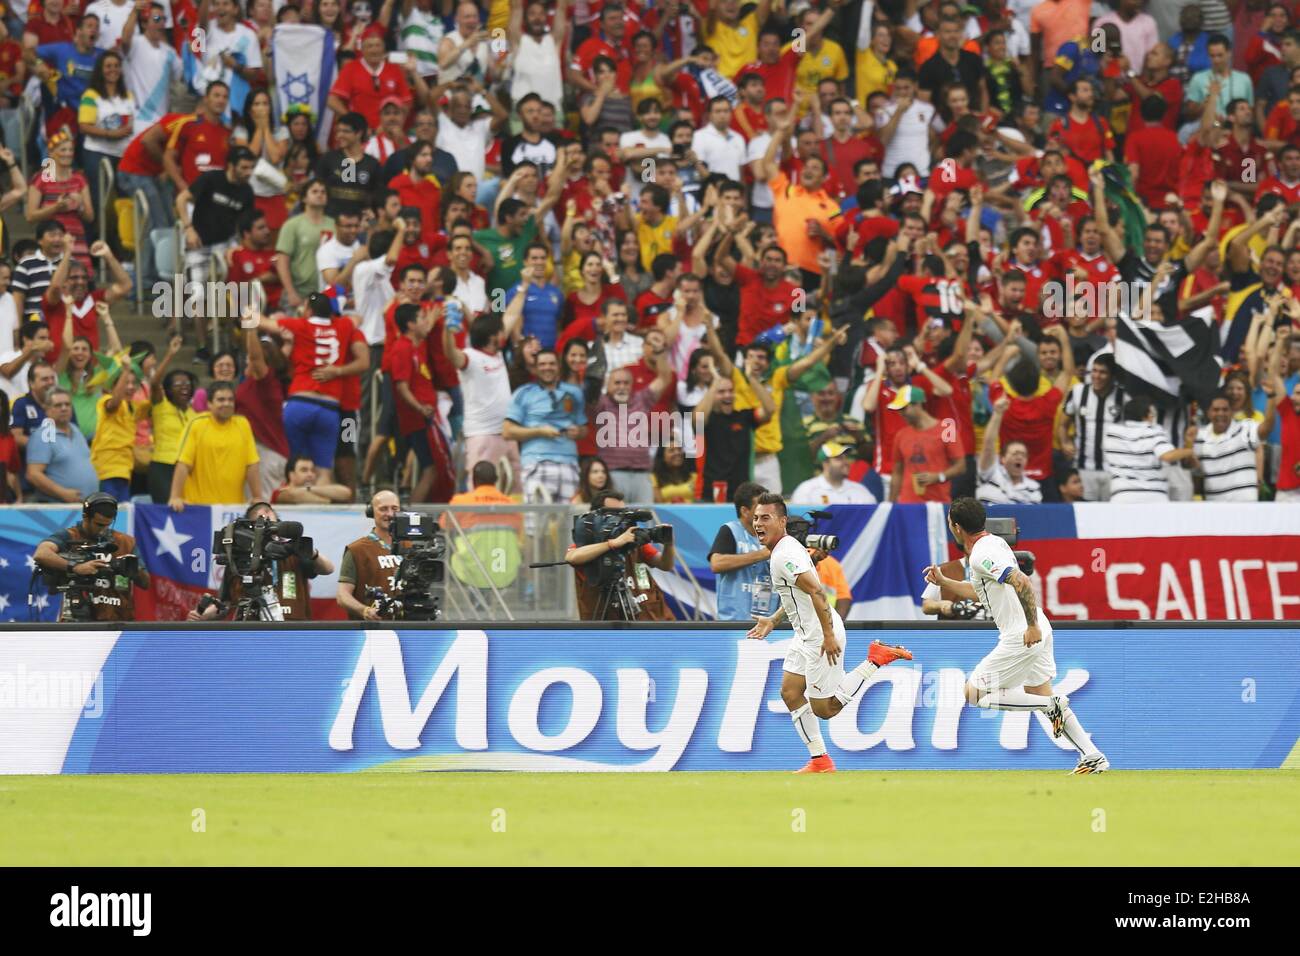 Rio de Janeiro, Brazil. 18th June, 2014. Eduardo Vargas (CHI) Football/Soccer : Eduardo Vargas of Chile celebrates after his goal during the FIFA World Cup Brazil match between Spain and Chile at the Maracana Stadium in Rio de Janeiro, Brazil . © AFLO/Alamy Live News Stock Photo